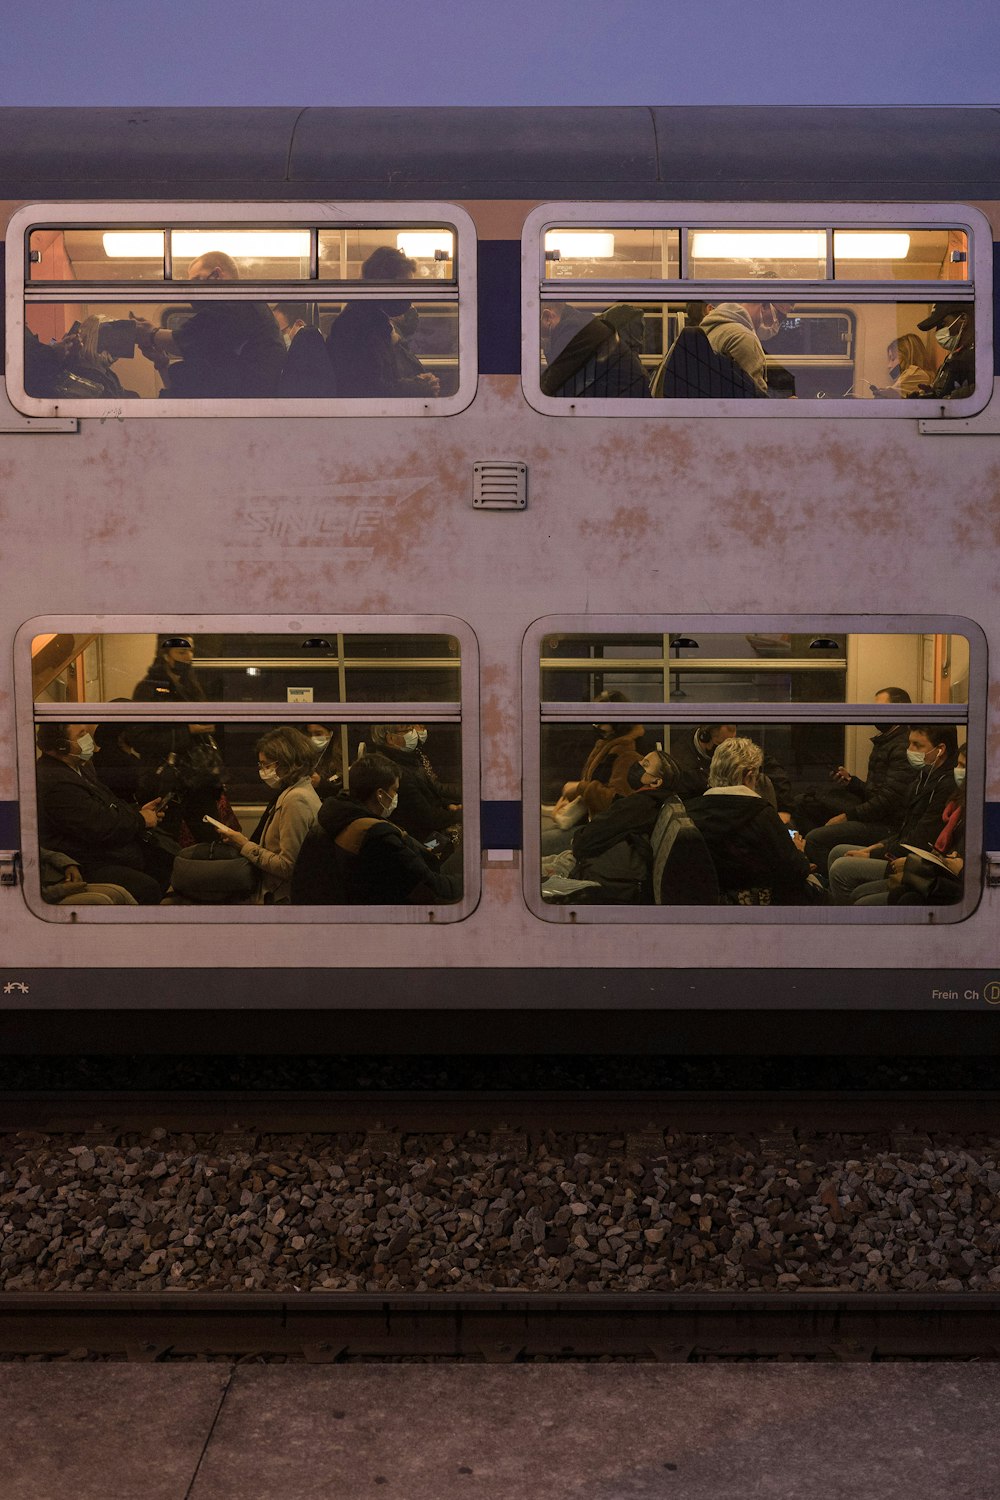 a group of people sitting inside of a train